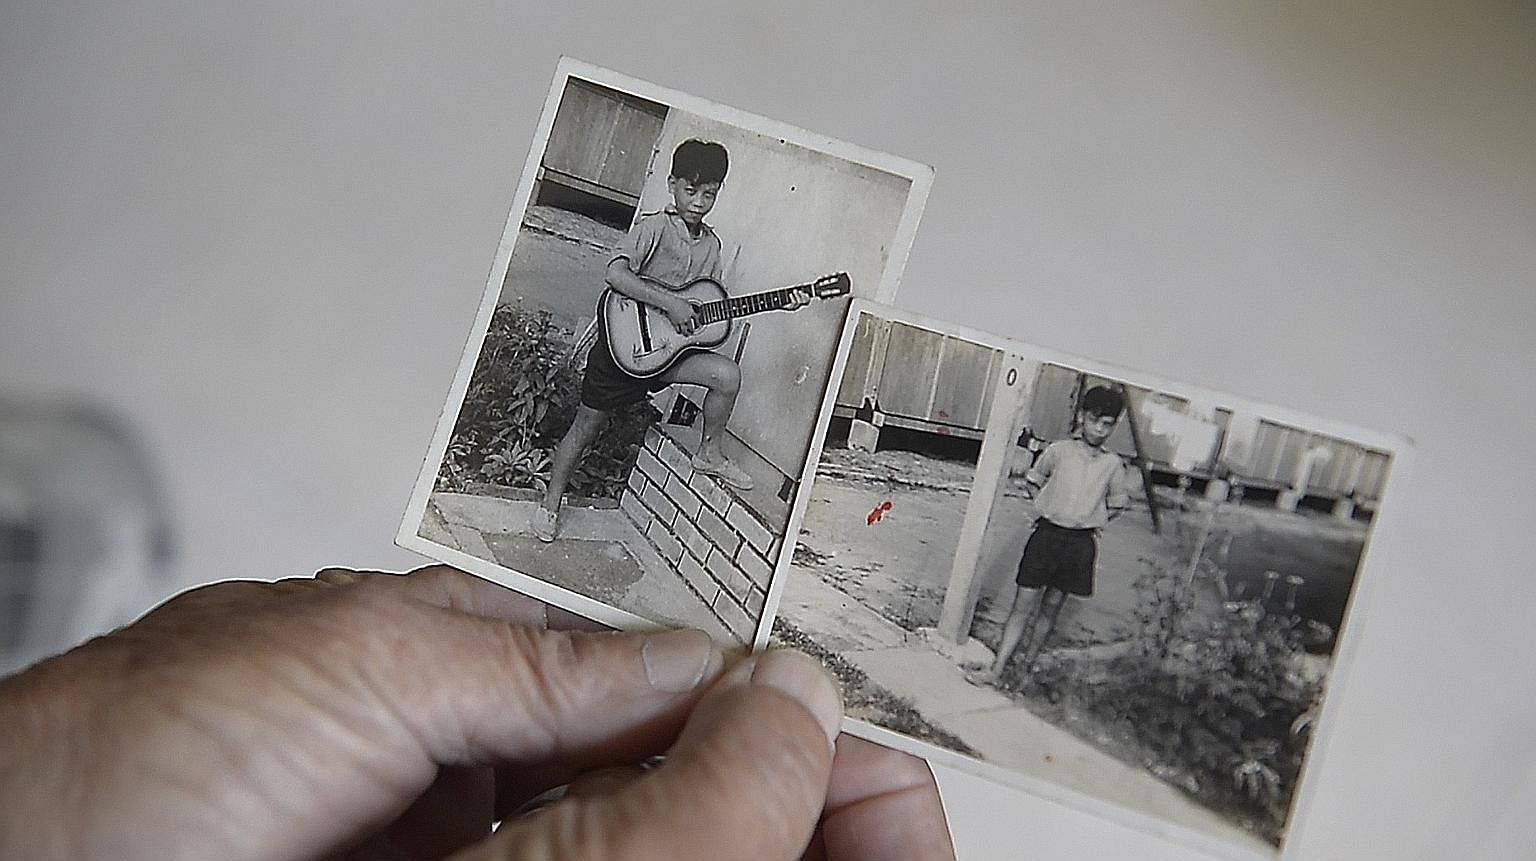 Above: Mr Thio Sin Nam in his early teens at a Paya Lebar work camp, where he did odd jobs. Left: Identity cards for Mr Thio Sin Nam's father Thio Kum Choon and mother Lam Ah Hup (pictured with a young Mr Thio).